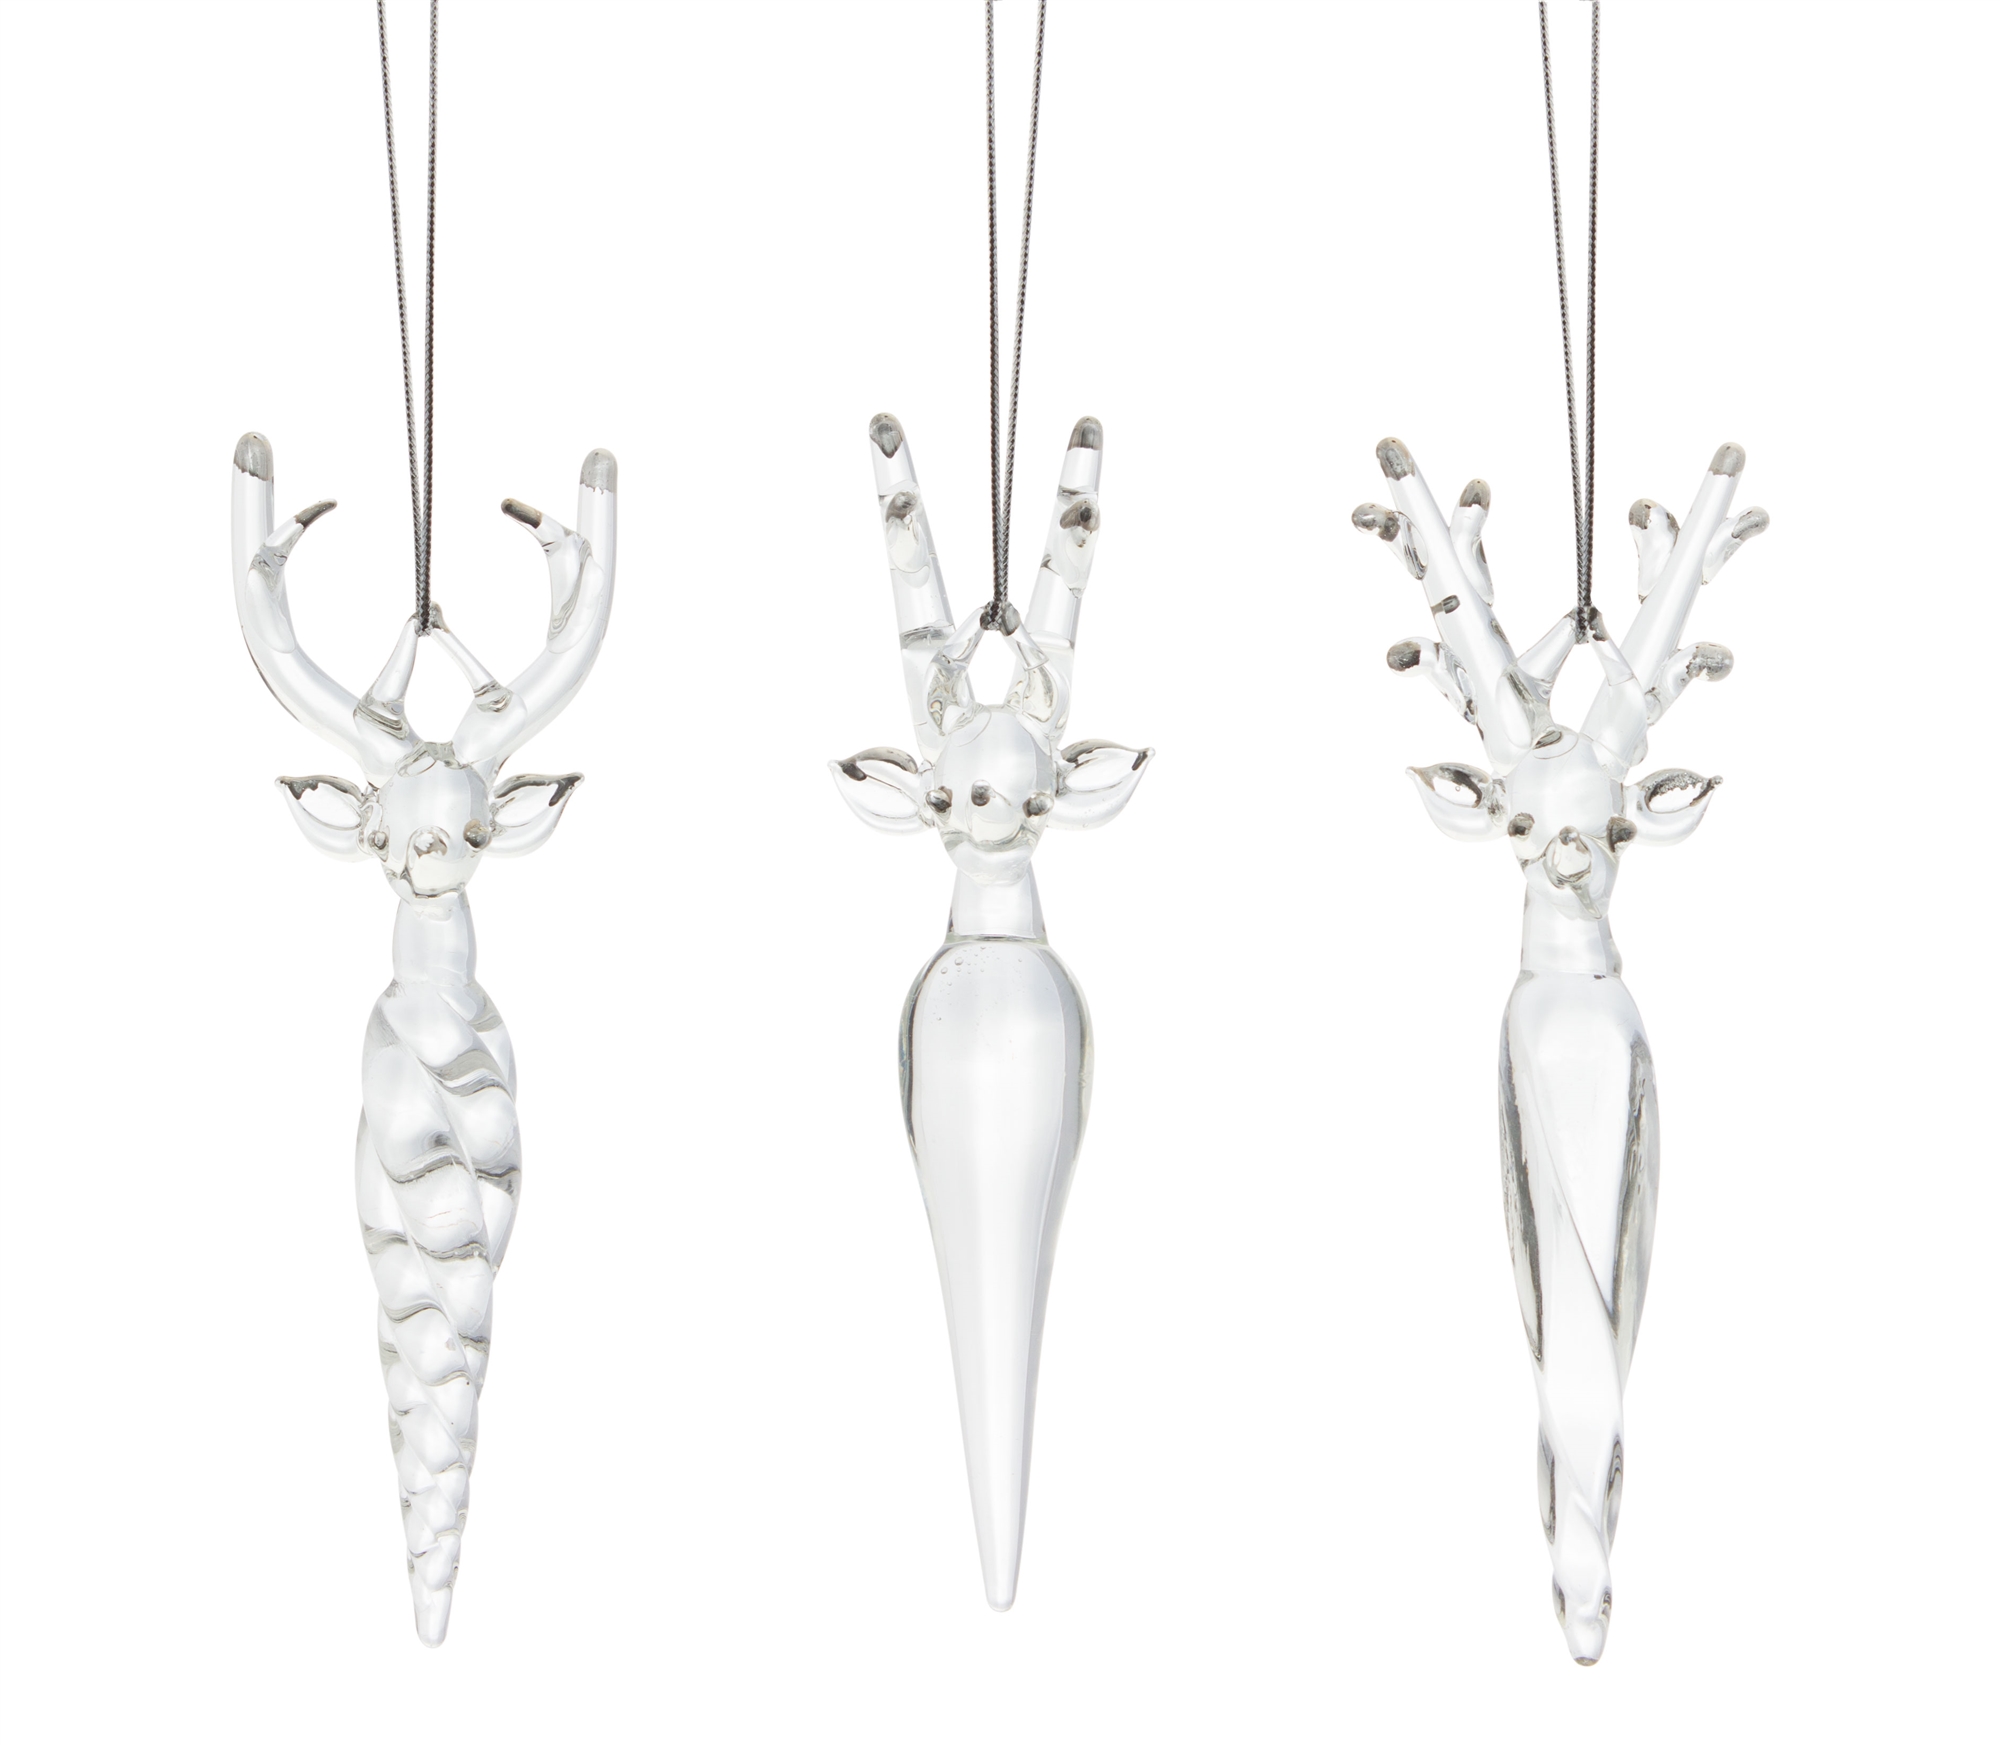 Deer Icicle (Set of 12) 4.75"H Glass